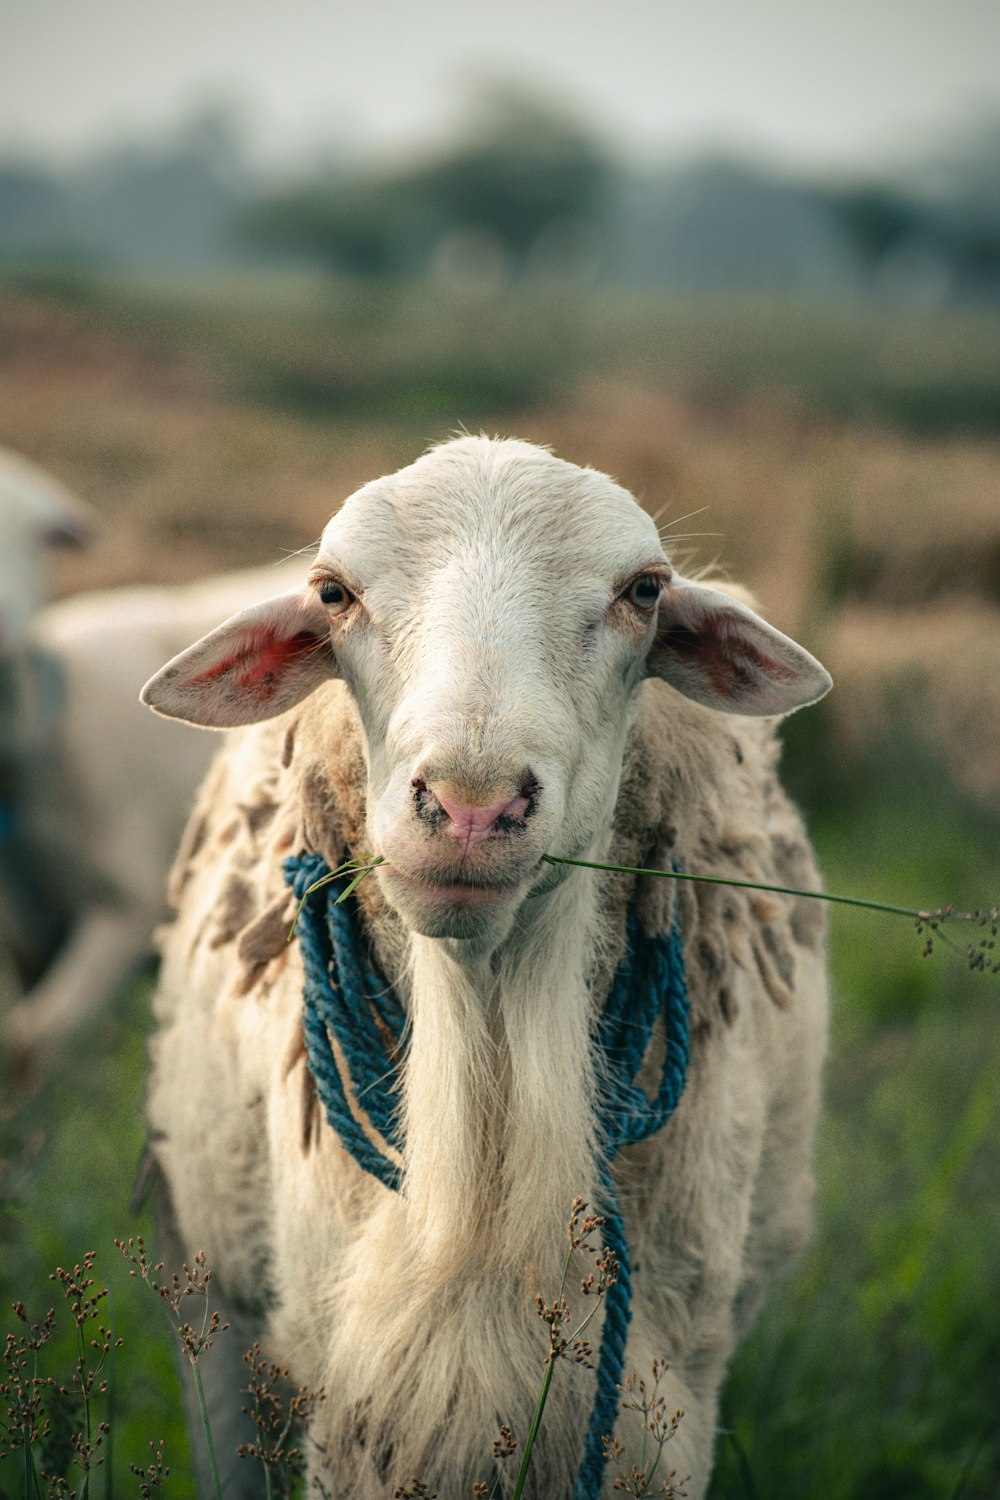 a white goat with a blue collar